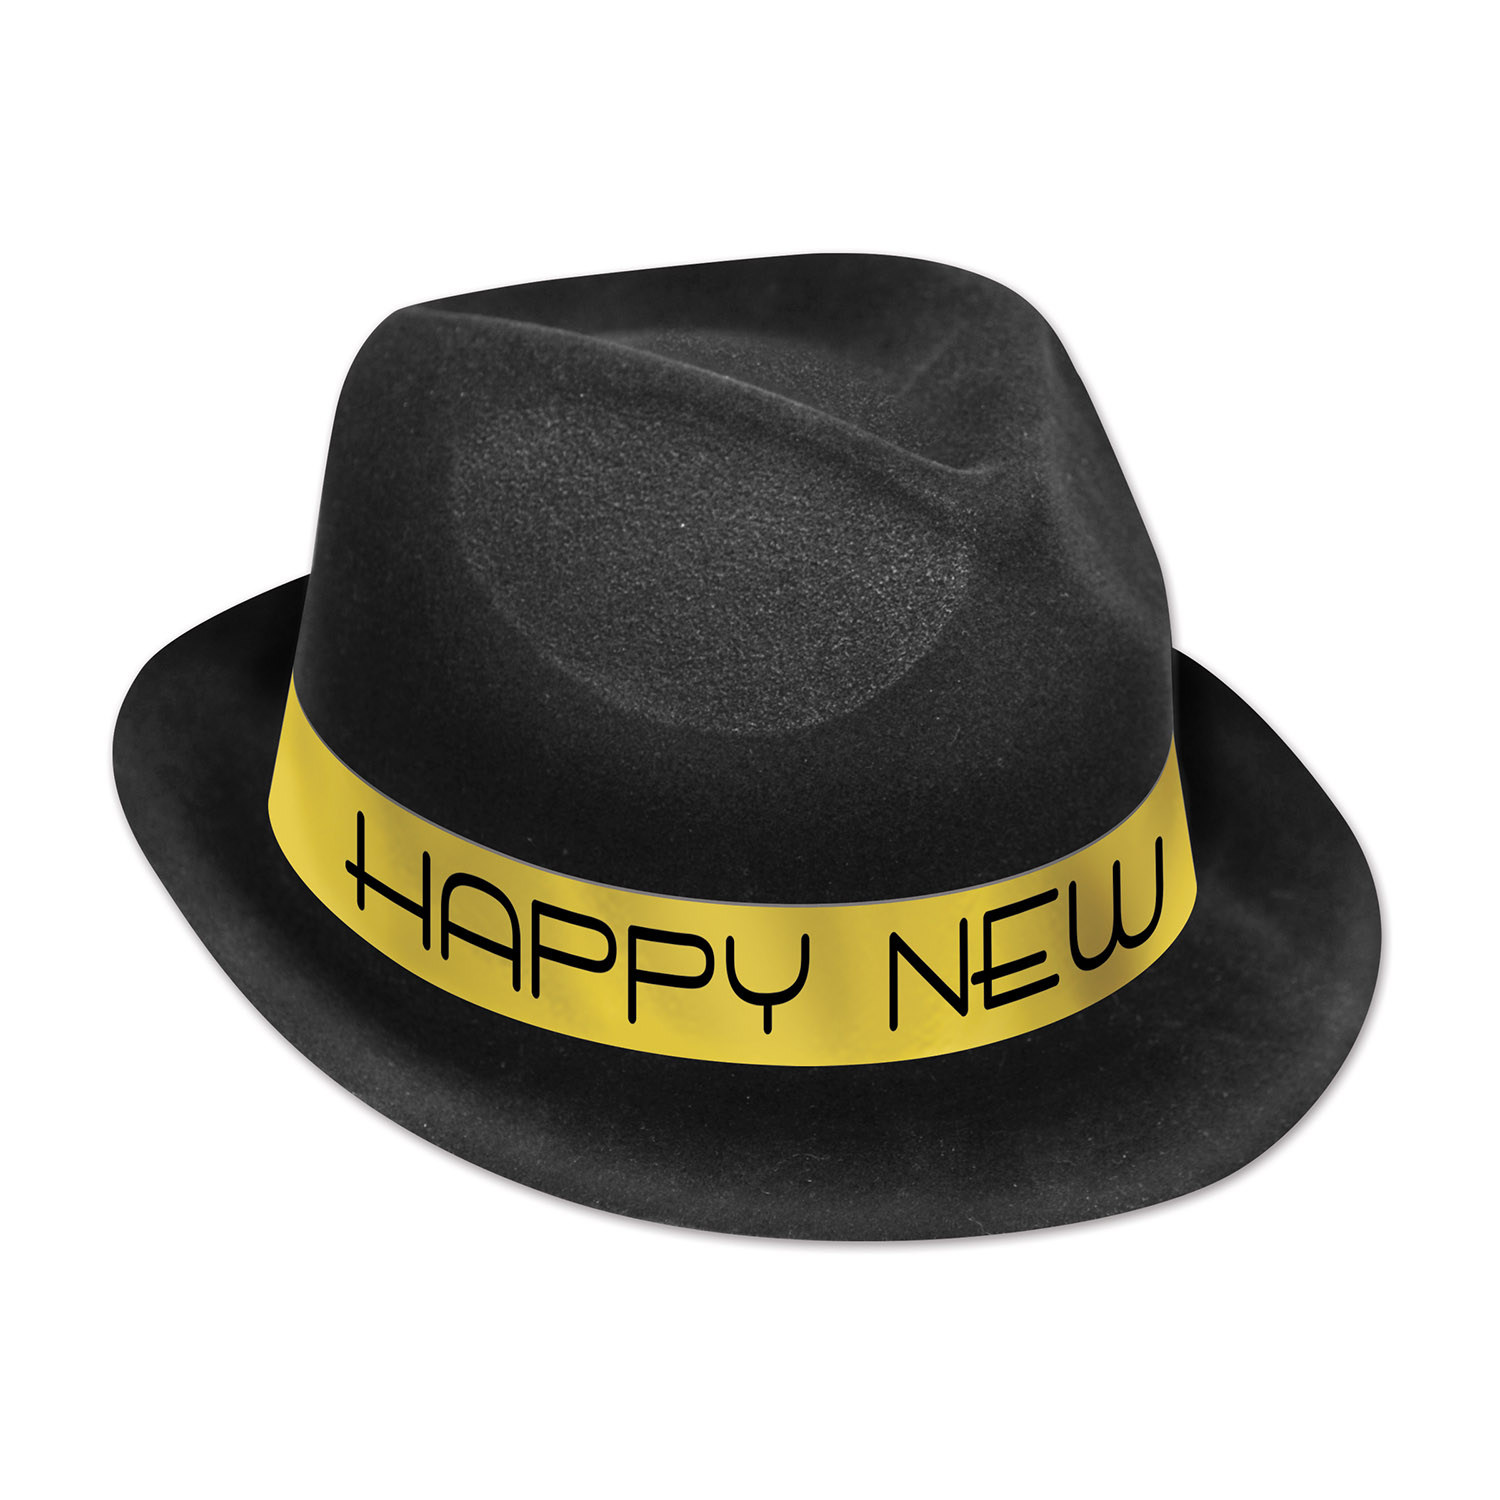 Plastic molded chairman hat with velour coating and a gold band that reads "Happy New Year".